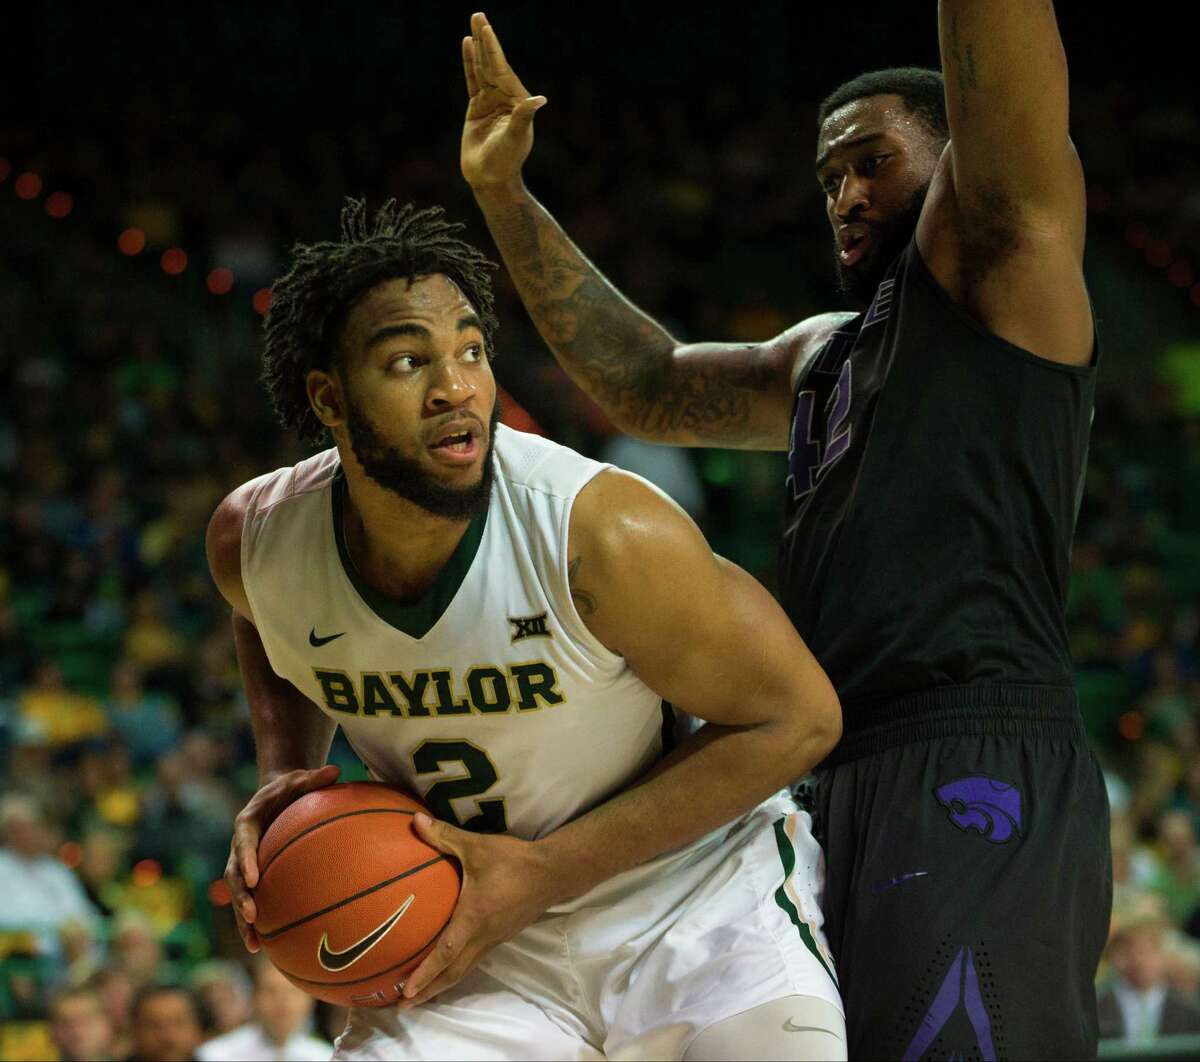 WACO, TX - FEBRUARY 21: Rico Gathers #2 of the Baylor Bears drives to the basket against Thomas Gipson #42 of the Kansas State Wildcats on February 21, 2015 at the Ferrell Center in Waco, Texas.